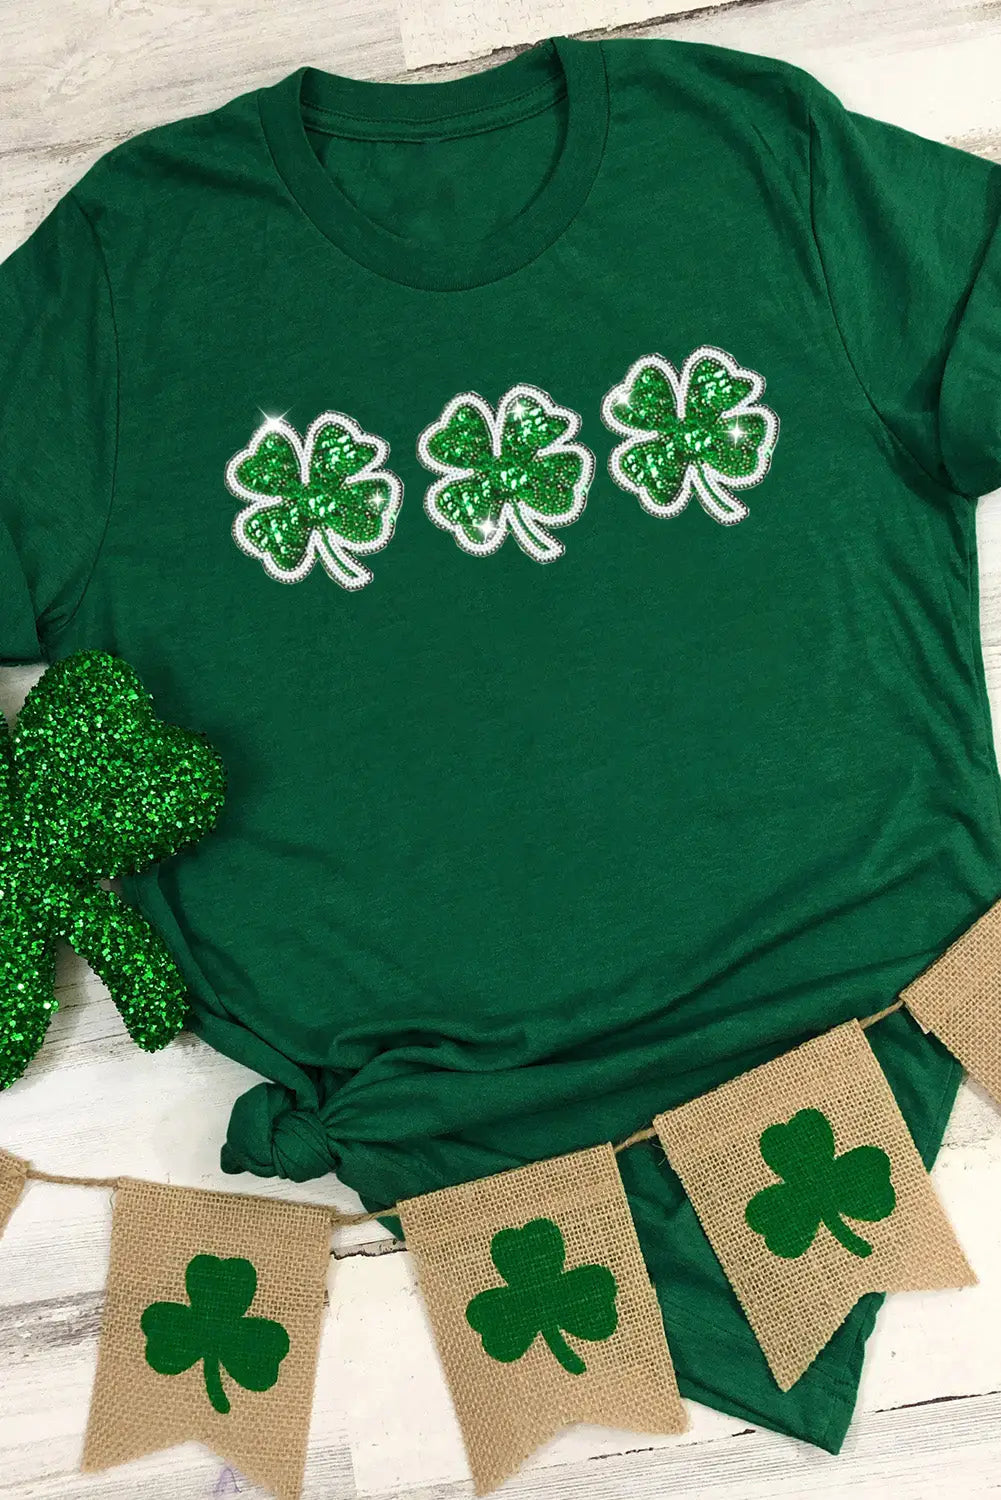 Green st patrick clover patch sequin graphic t - shirt - s 62% polyester + 32% cotton + 6% elastane t - shirts